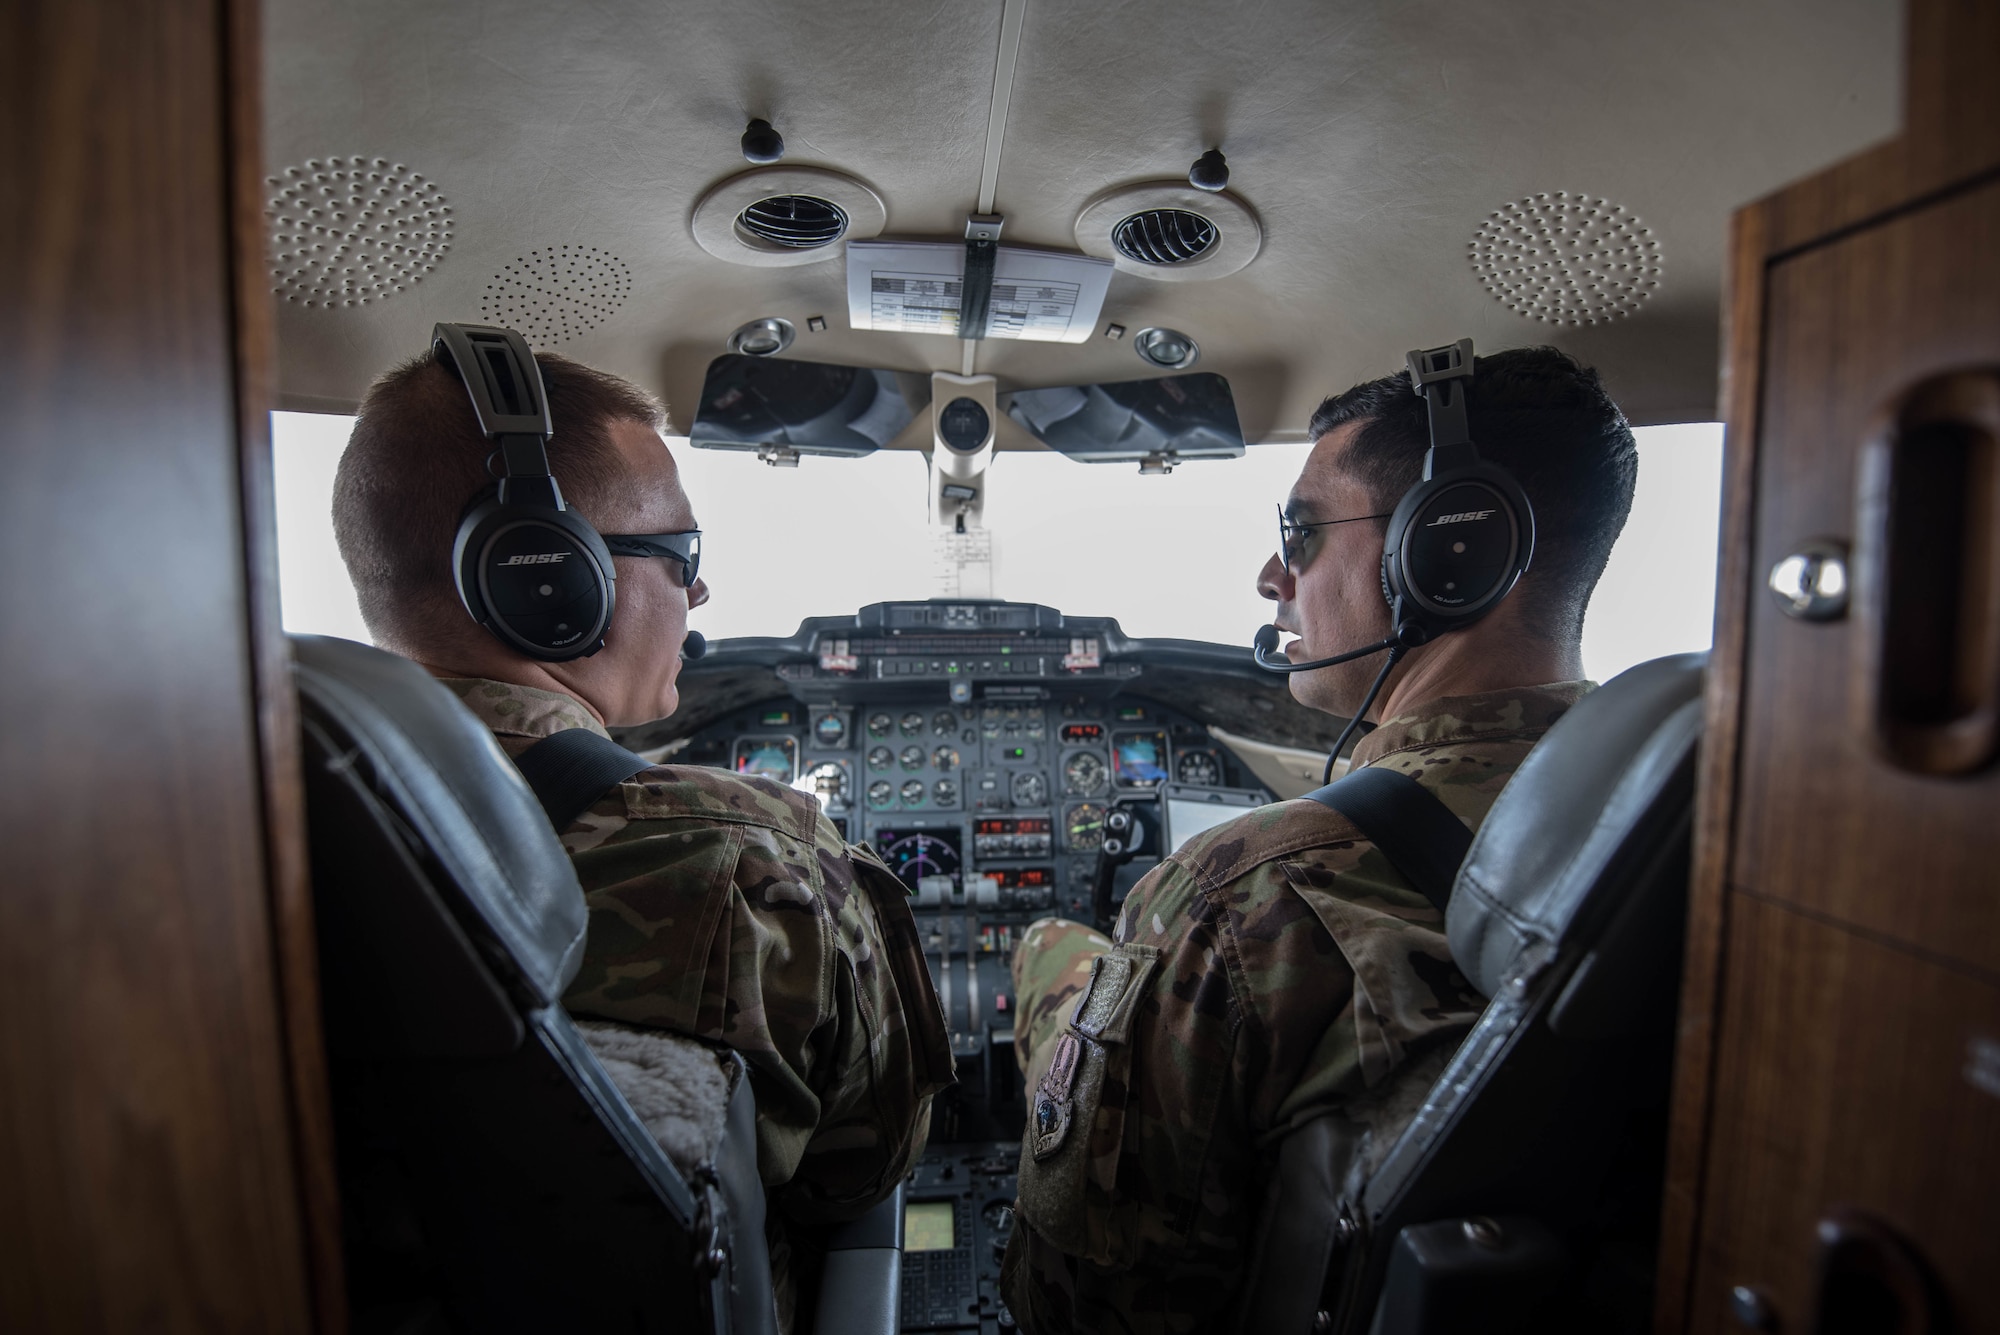 U.S. Air Force 1st Lt. Riley Snowden (left) and Capt. Ramiro Rios, C-21 pilots assigned to the 746th Expeditionary Airlift Squadron, fly a mission over the Middle East, Feb. 7, 2018. (U.S. Air National Guard photo by Master Sgt. Phil Speck)